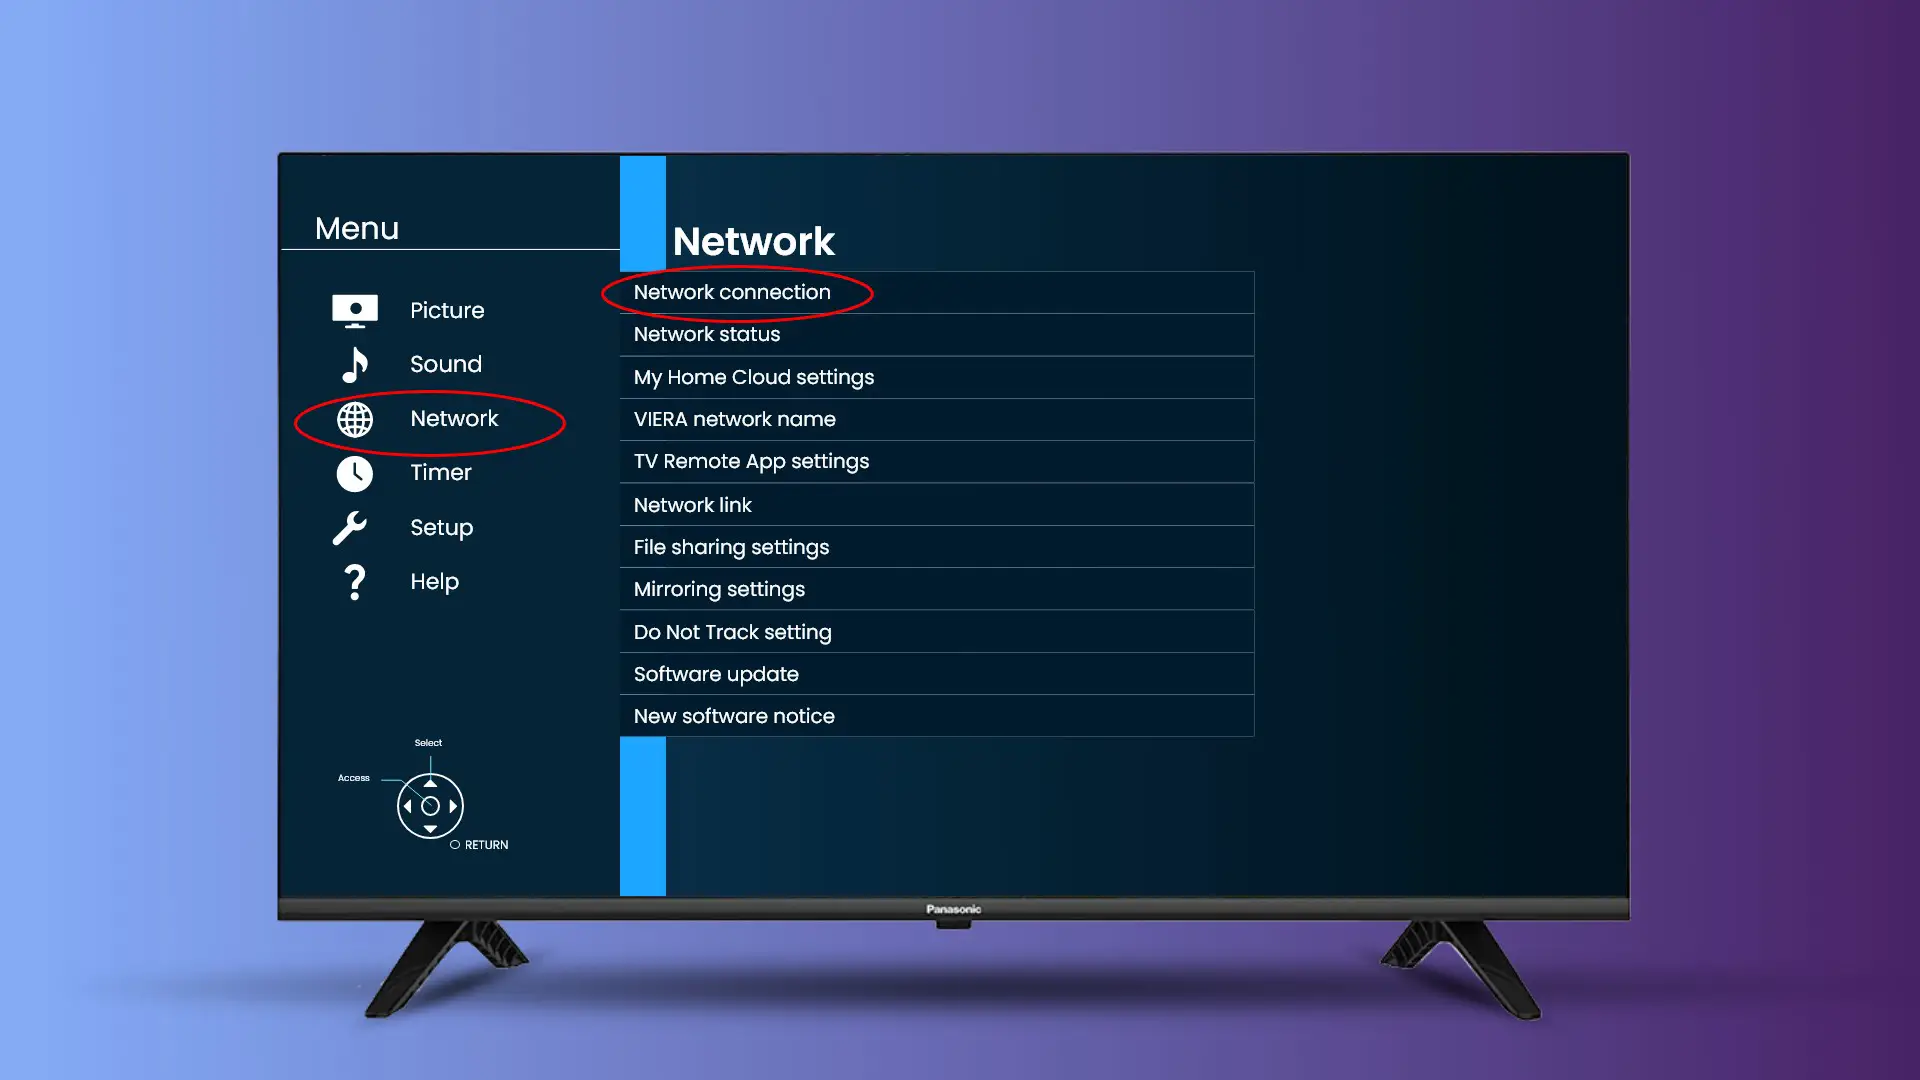 How to connect Panasonic TV to WiFi - Step-by-Step Guide